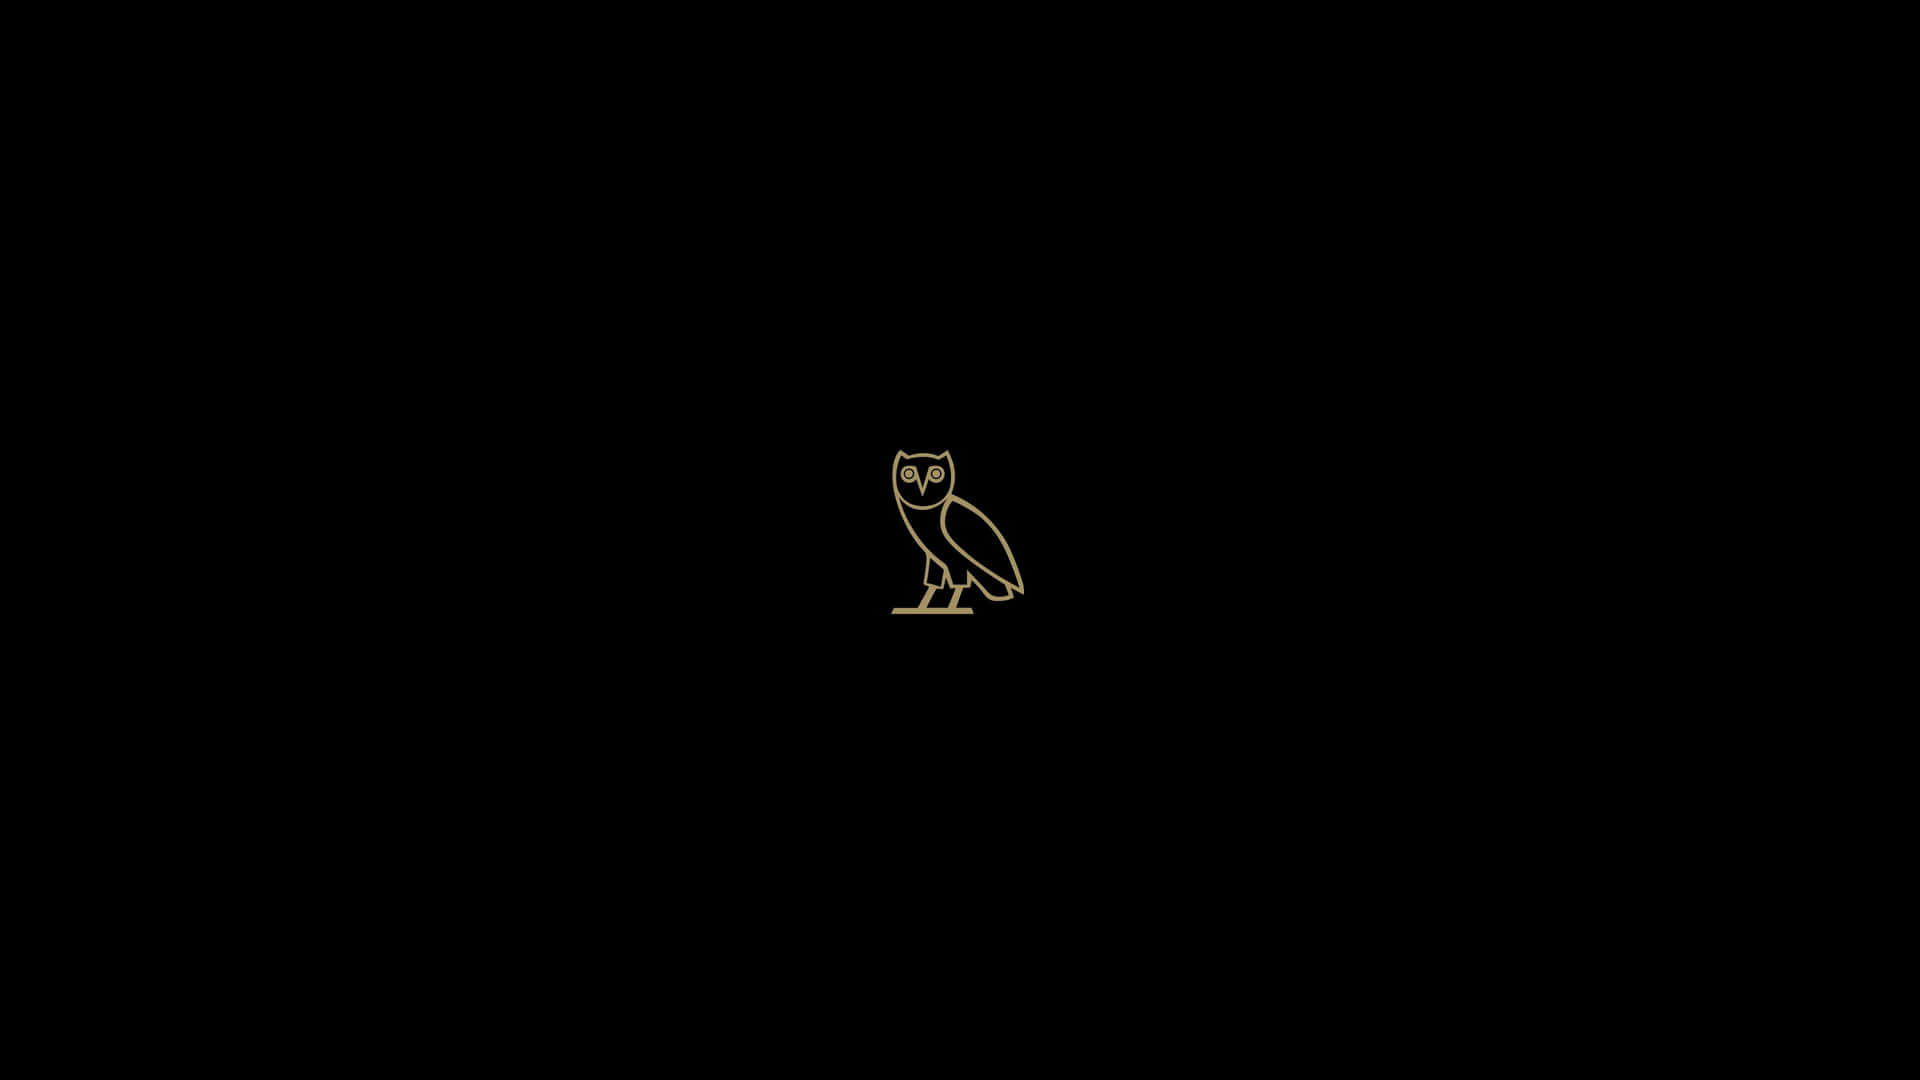 Check Out Drake's OVO Owl Iphone Wallpaper